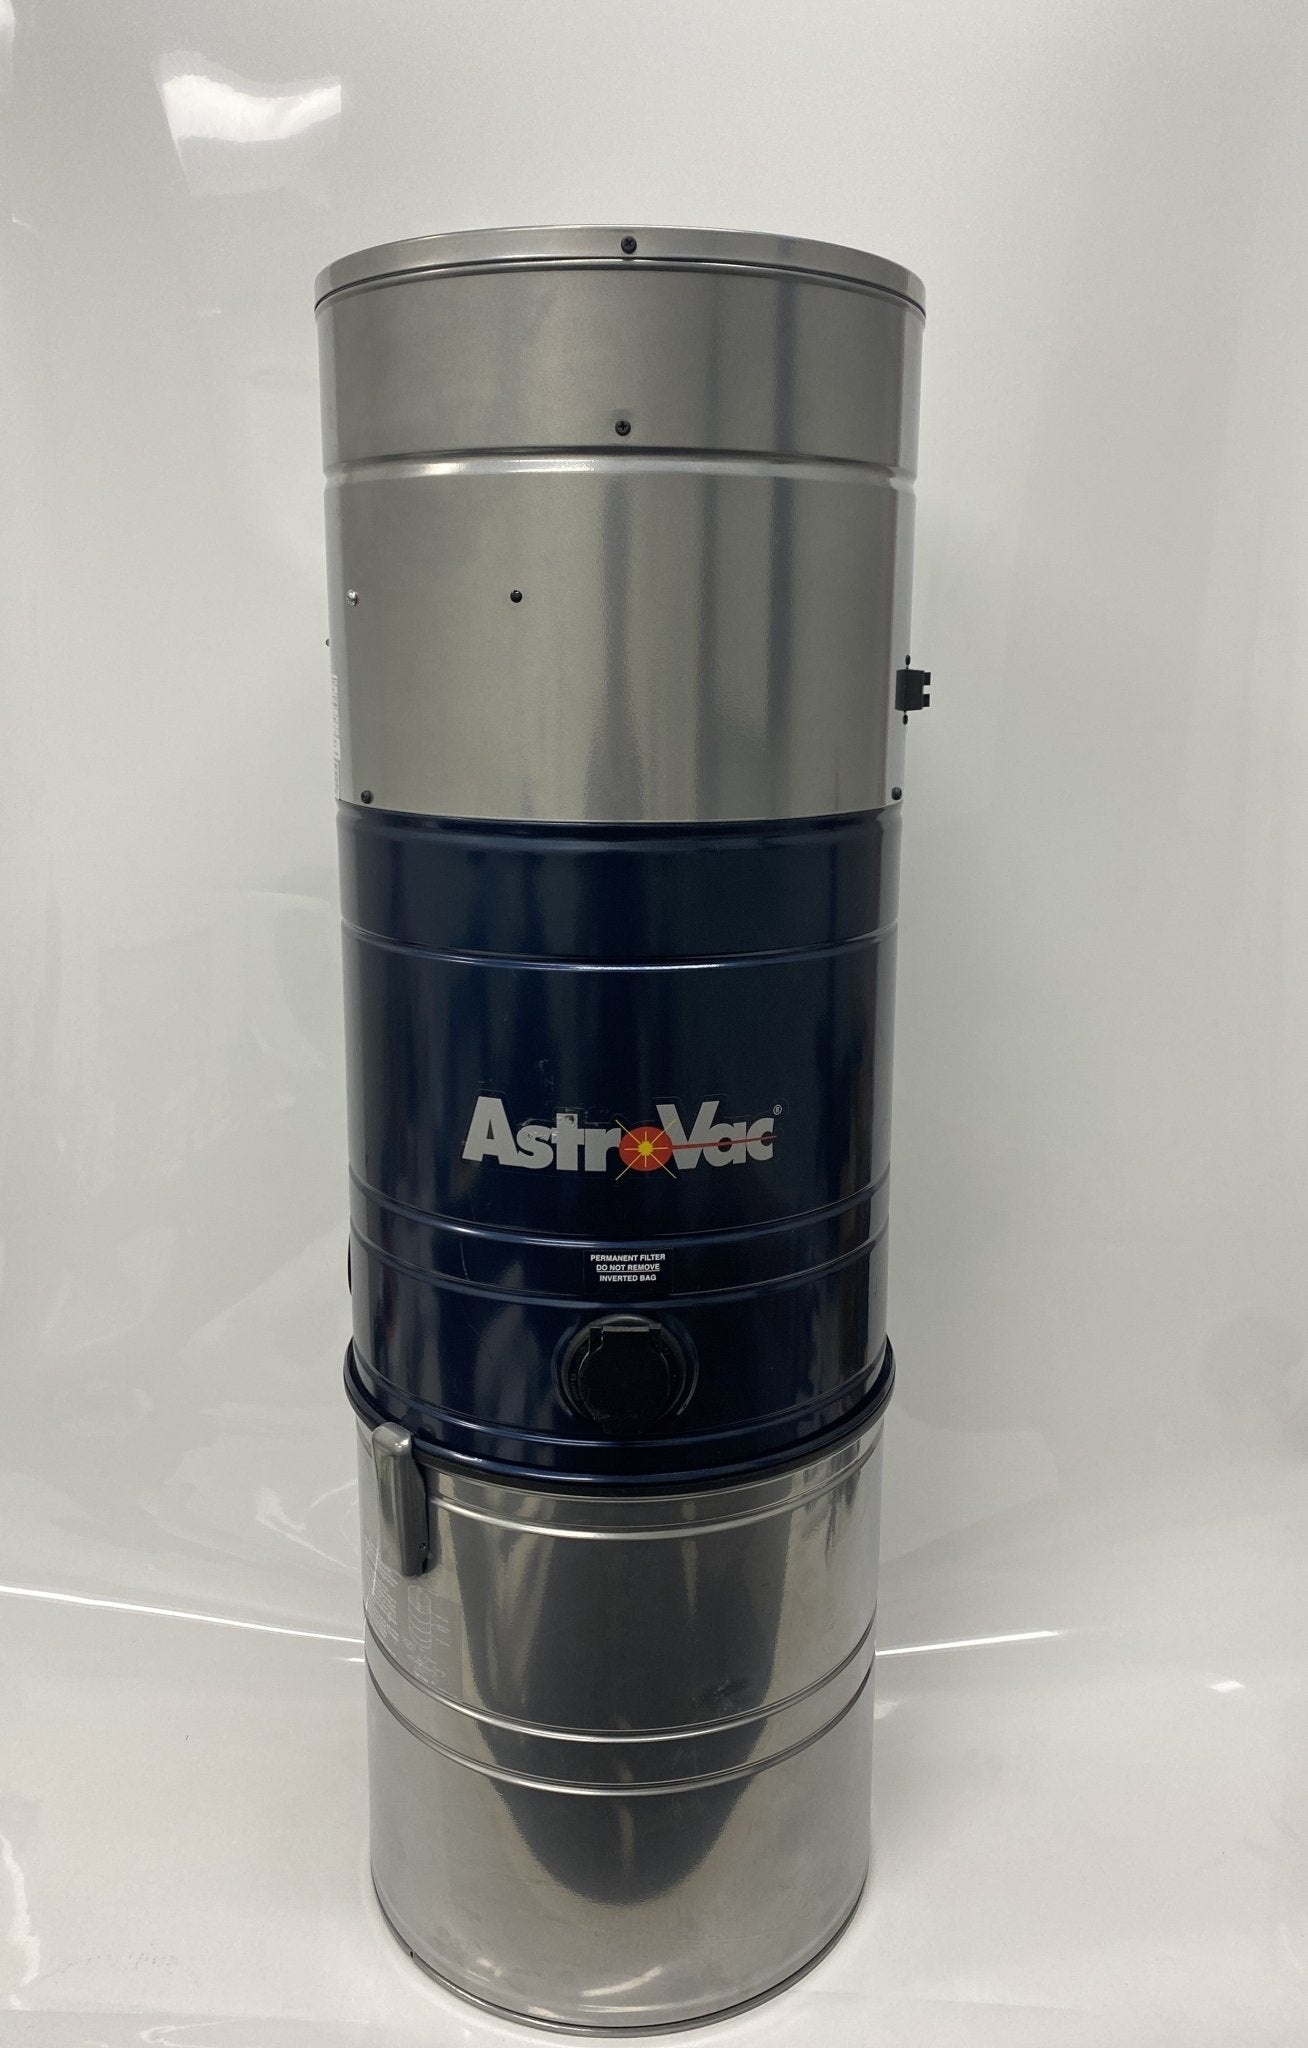 Improved Cleaning Experience with ASTROVAC SR54 Central Vacuum System and Upgraded Kit